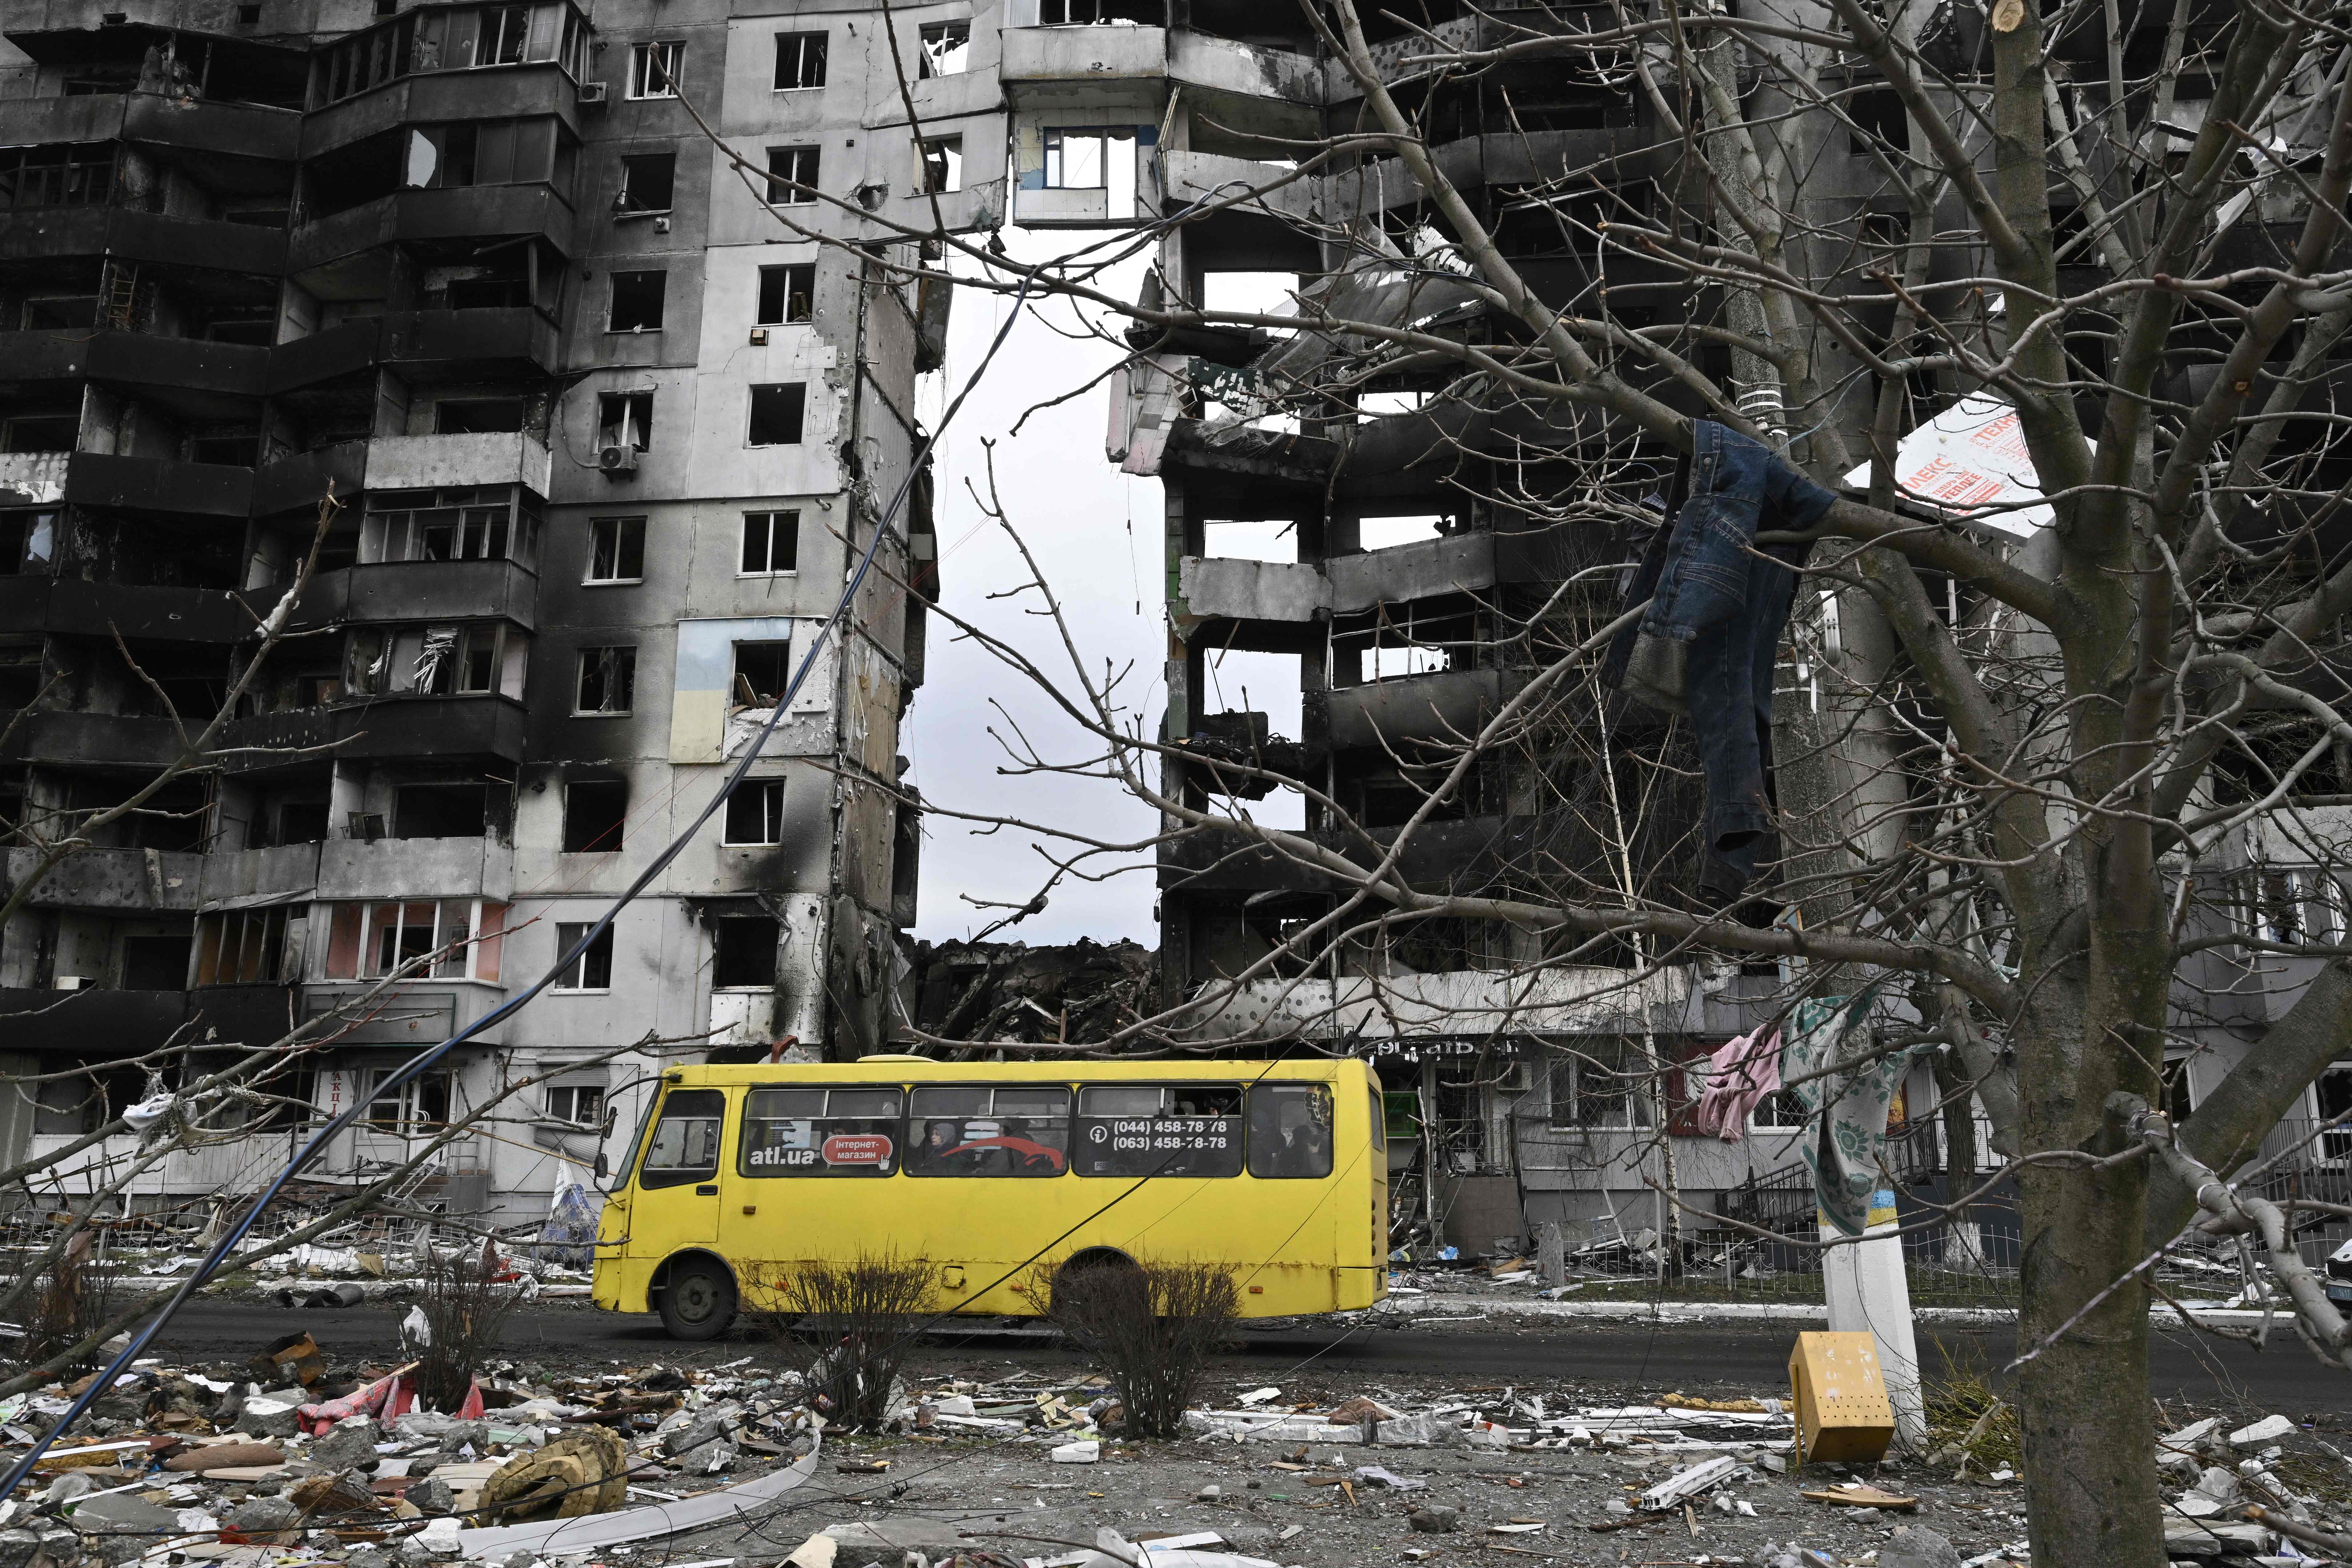 A bus passes by a destroyed building in the town of Borodianka, northwest of Kyiv